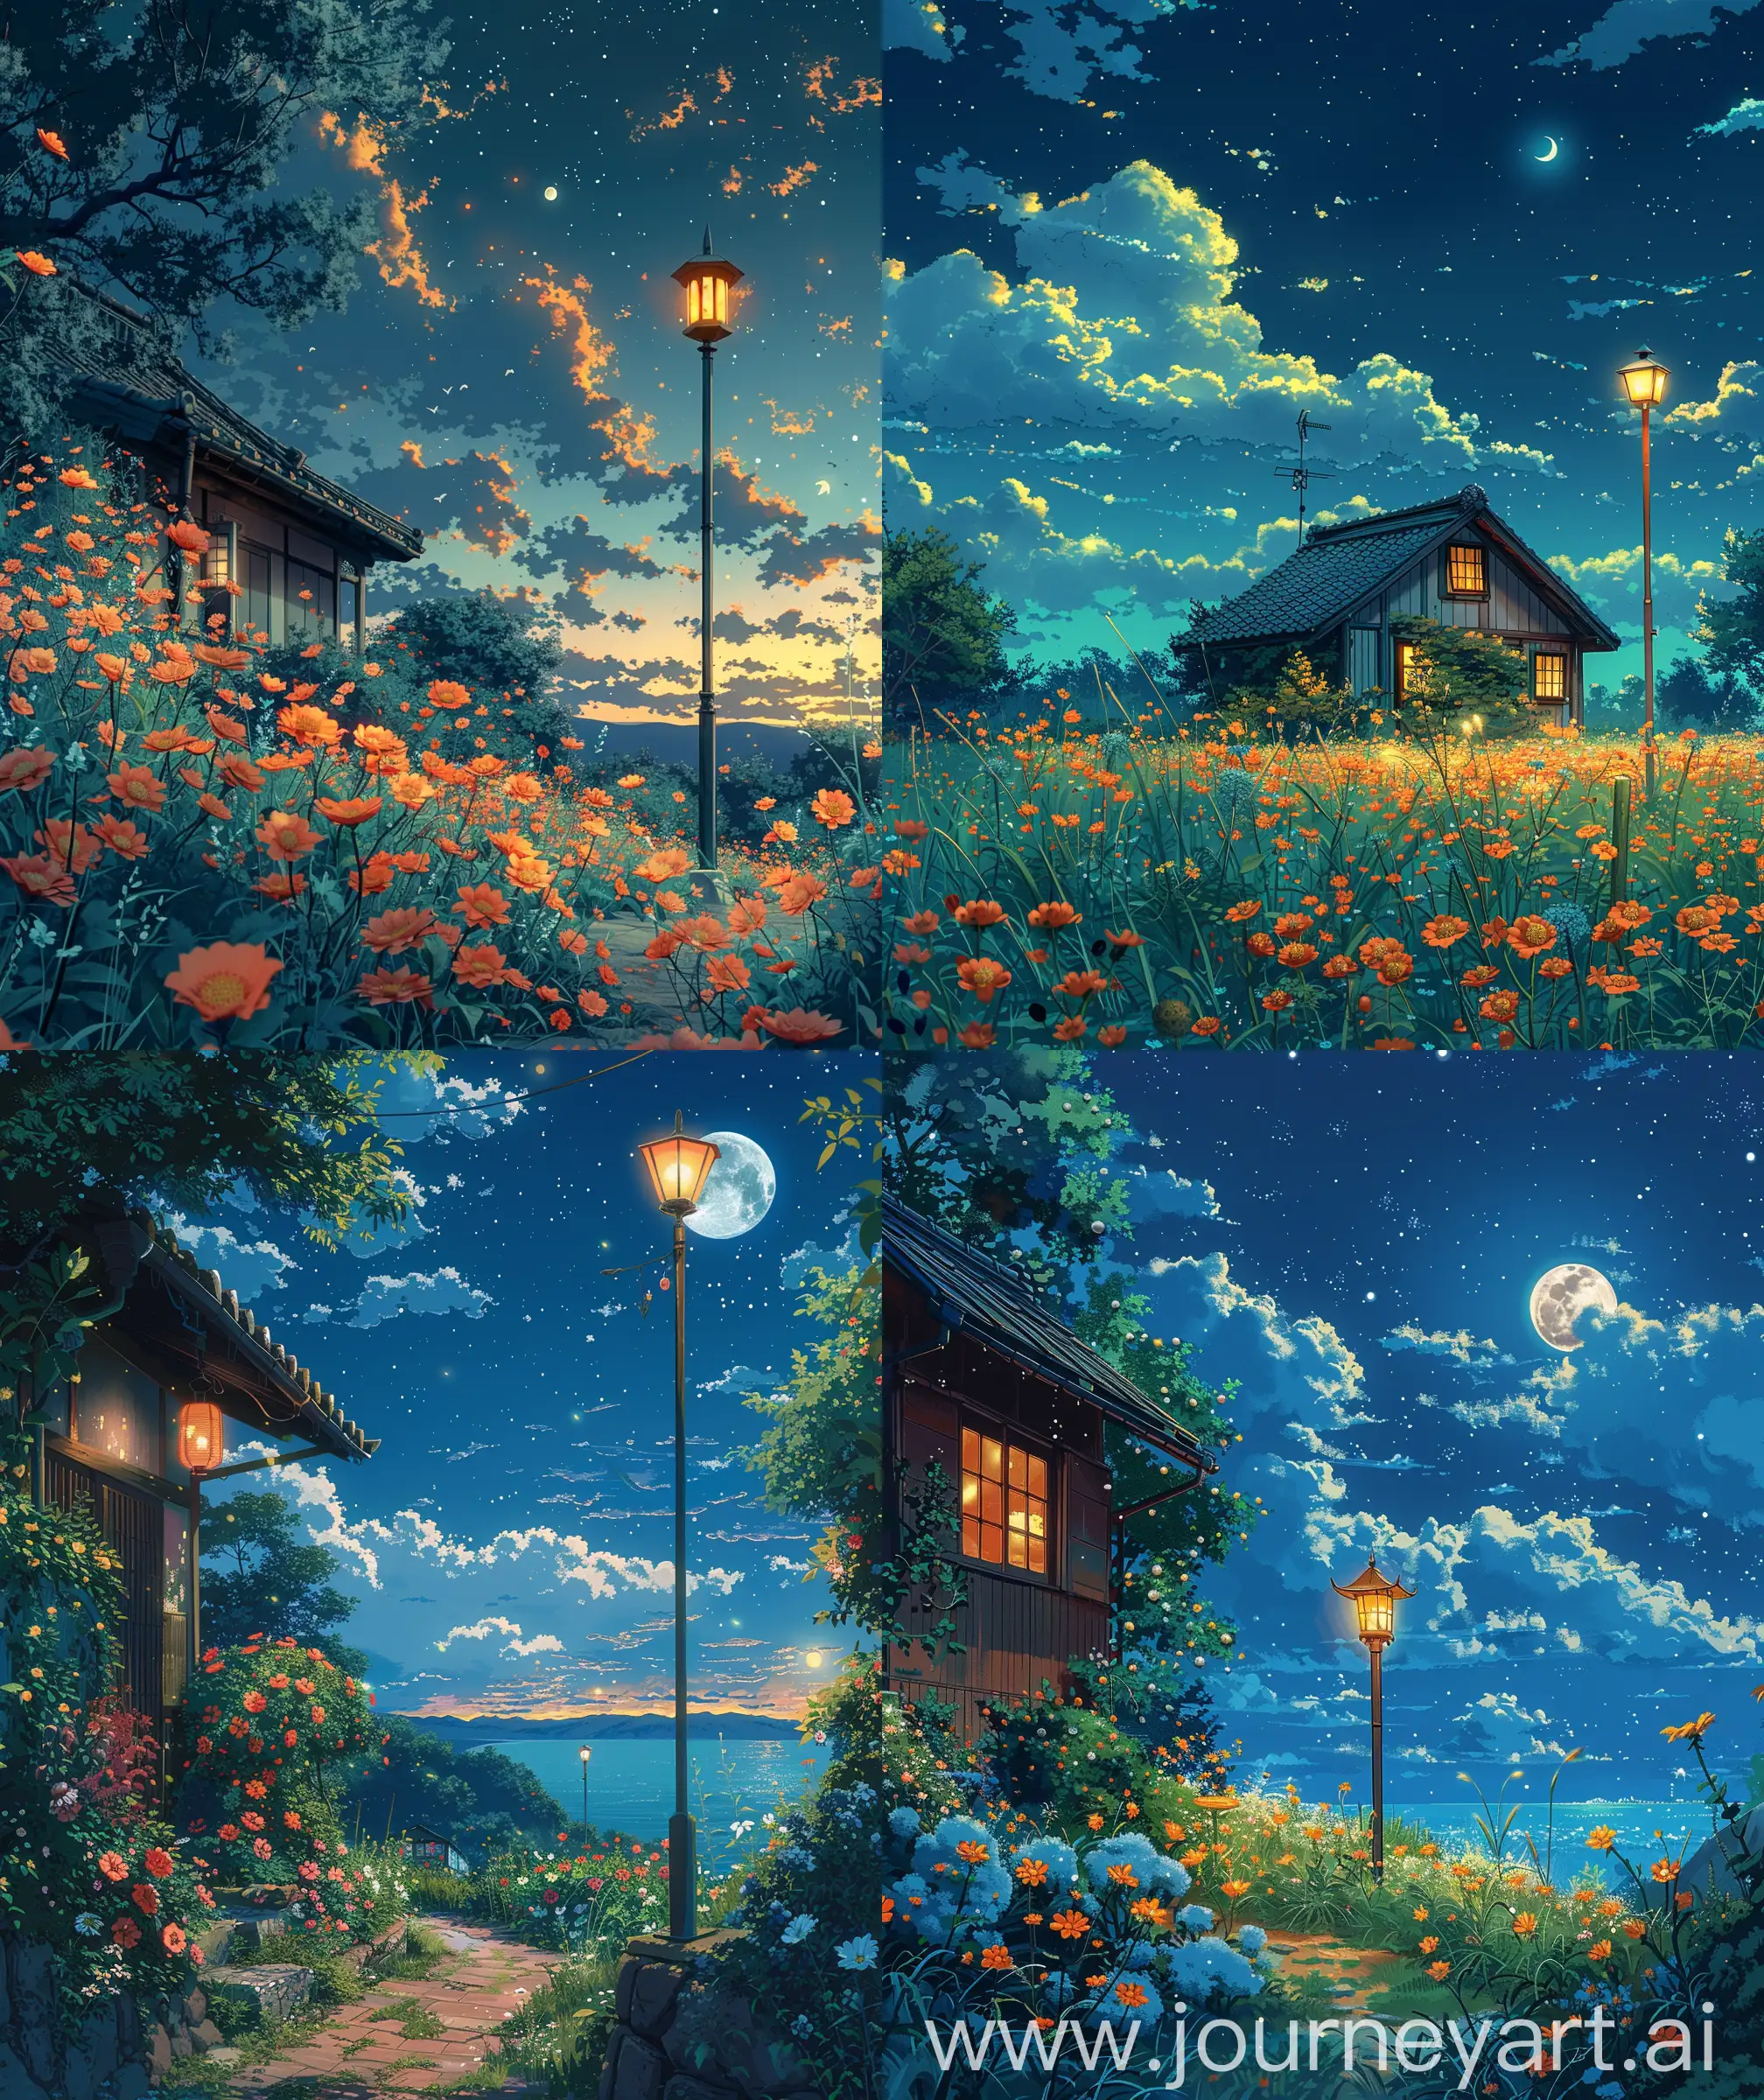 Tranquil-Moonlit-Anime-Scenery-Relaxing-in-Wild-with-Vibrant-Flowers-and-Cozy-Vibes